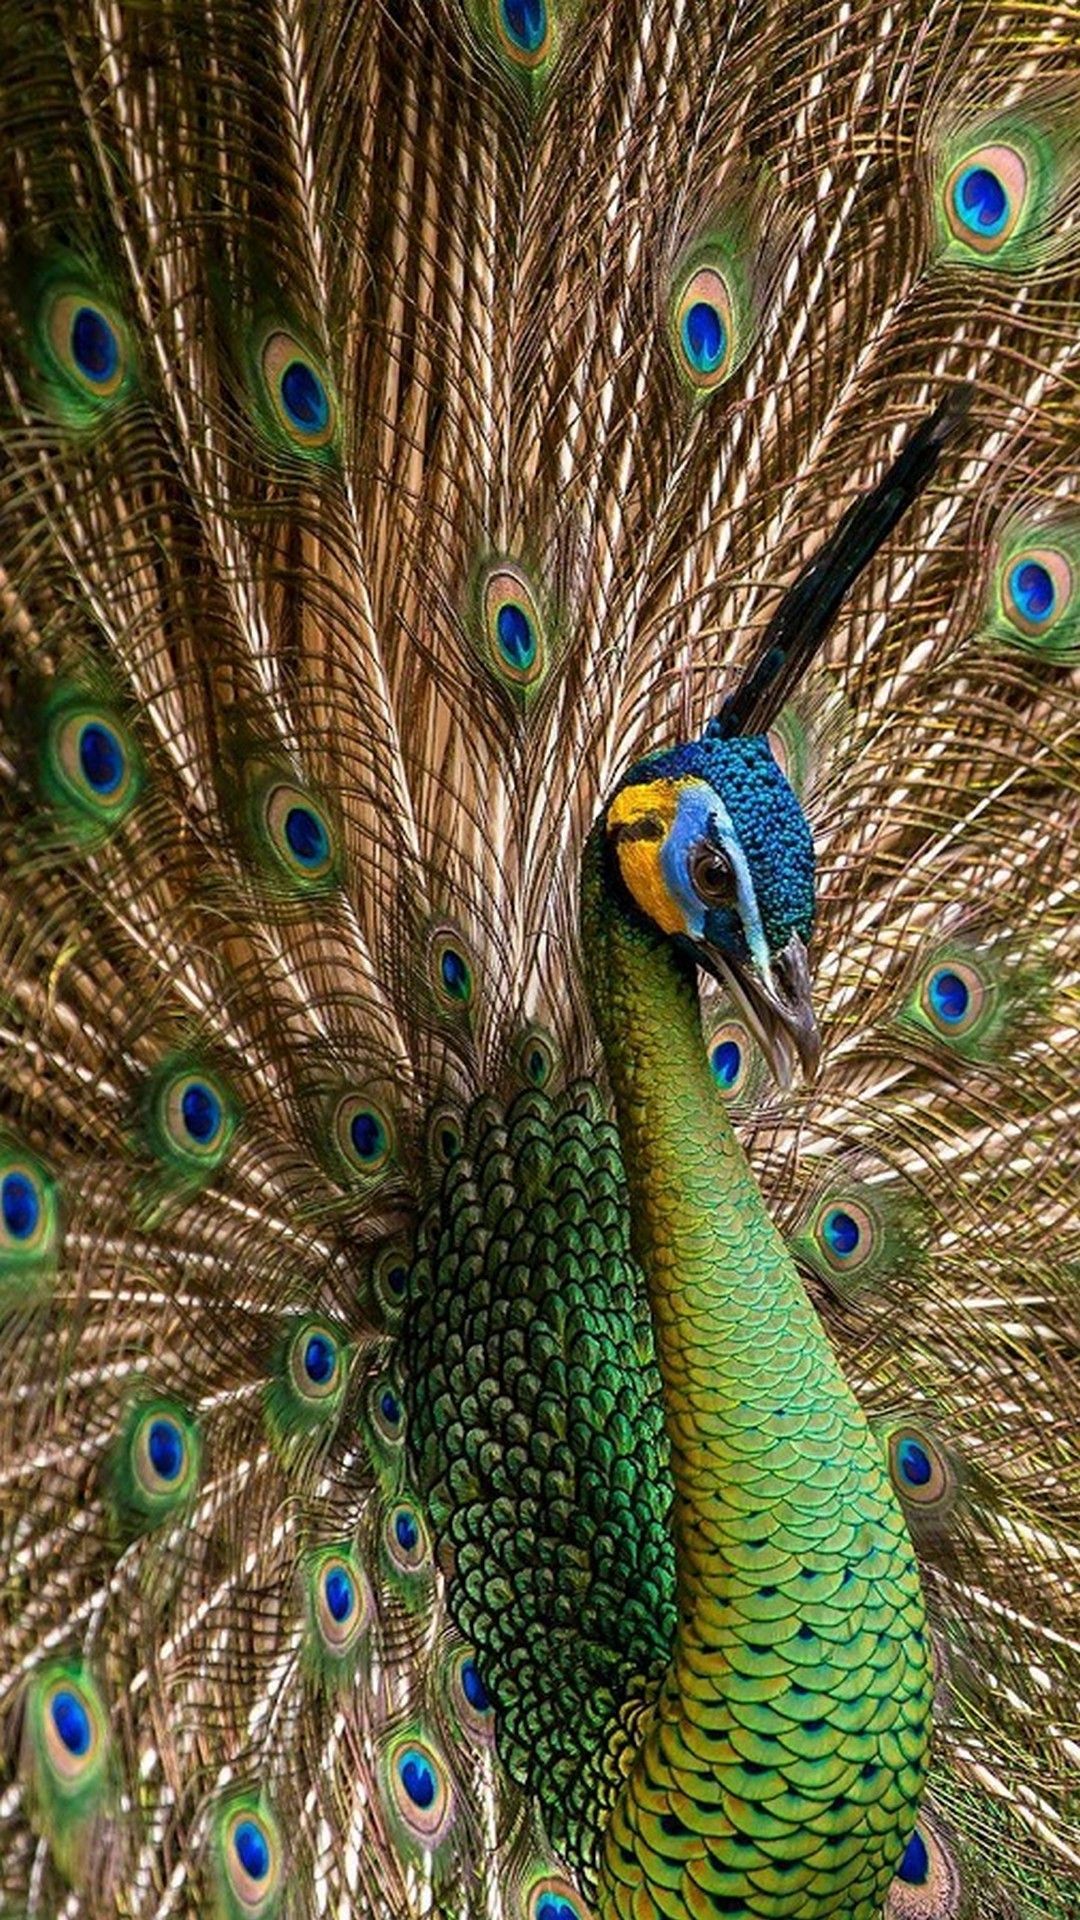 Peacock Wallpaper Android. Peacock picture, Peacock wallpaper